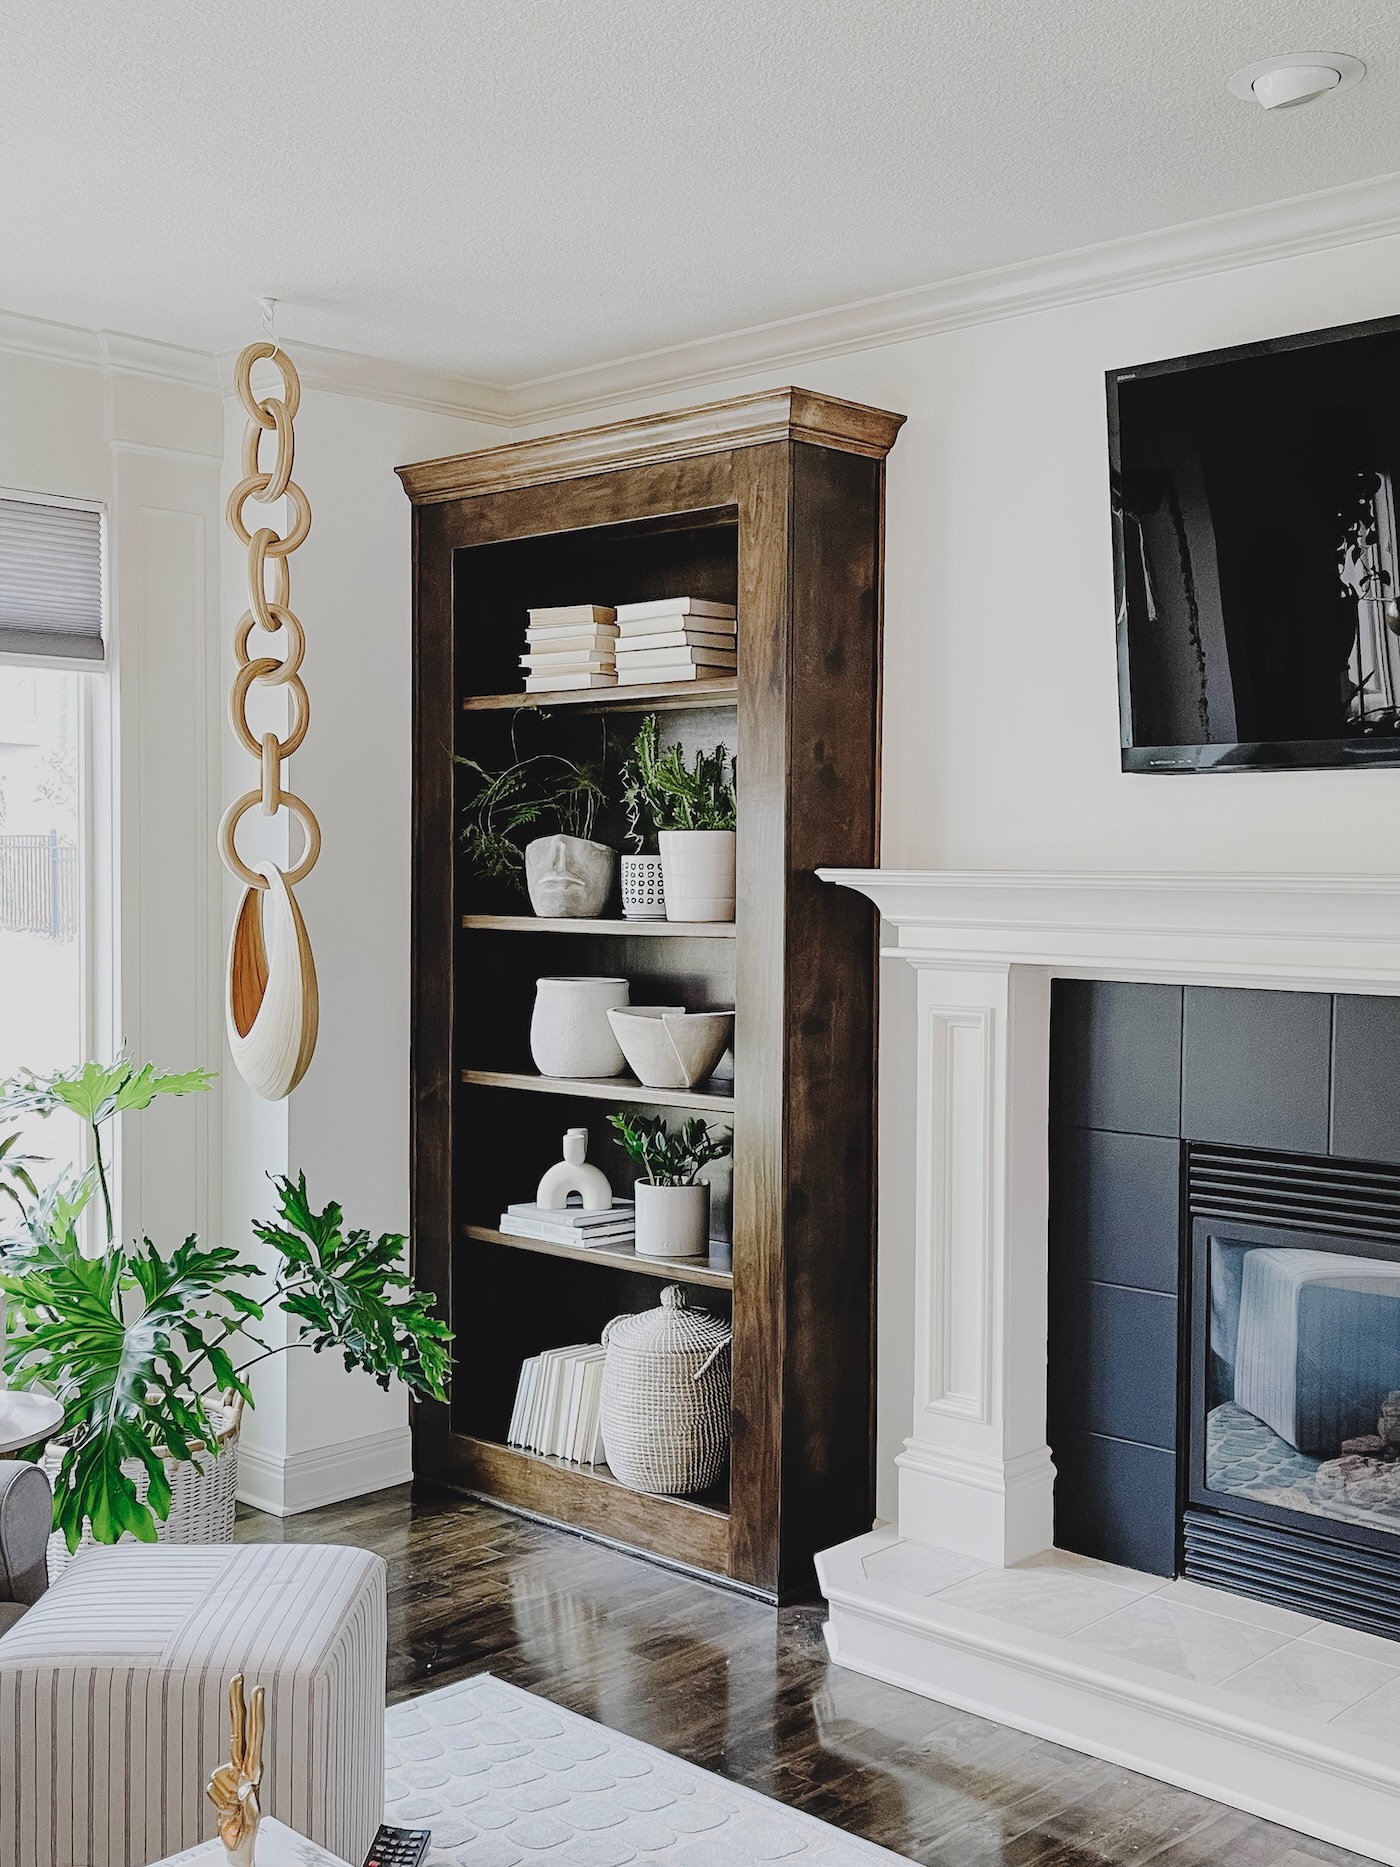 How to Pair Cream Trim with Warm White Walls - Life Love Larson